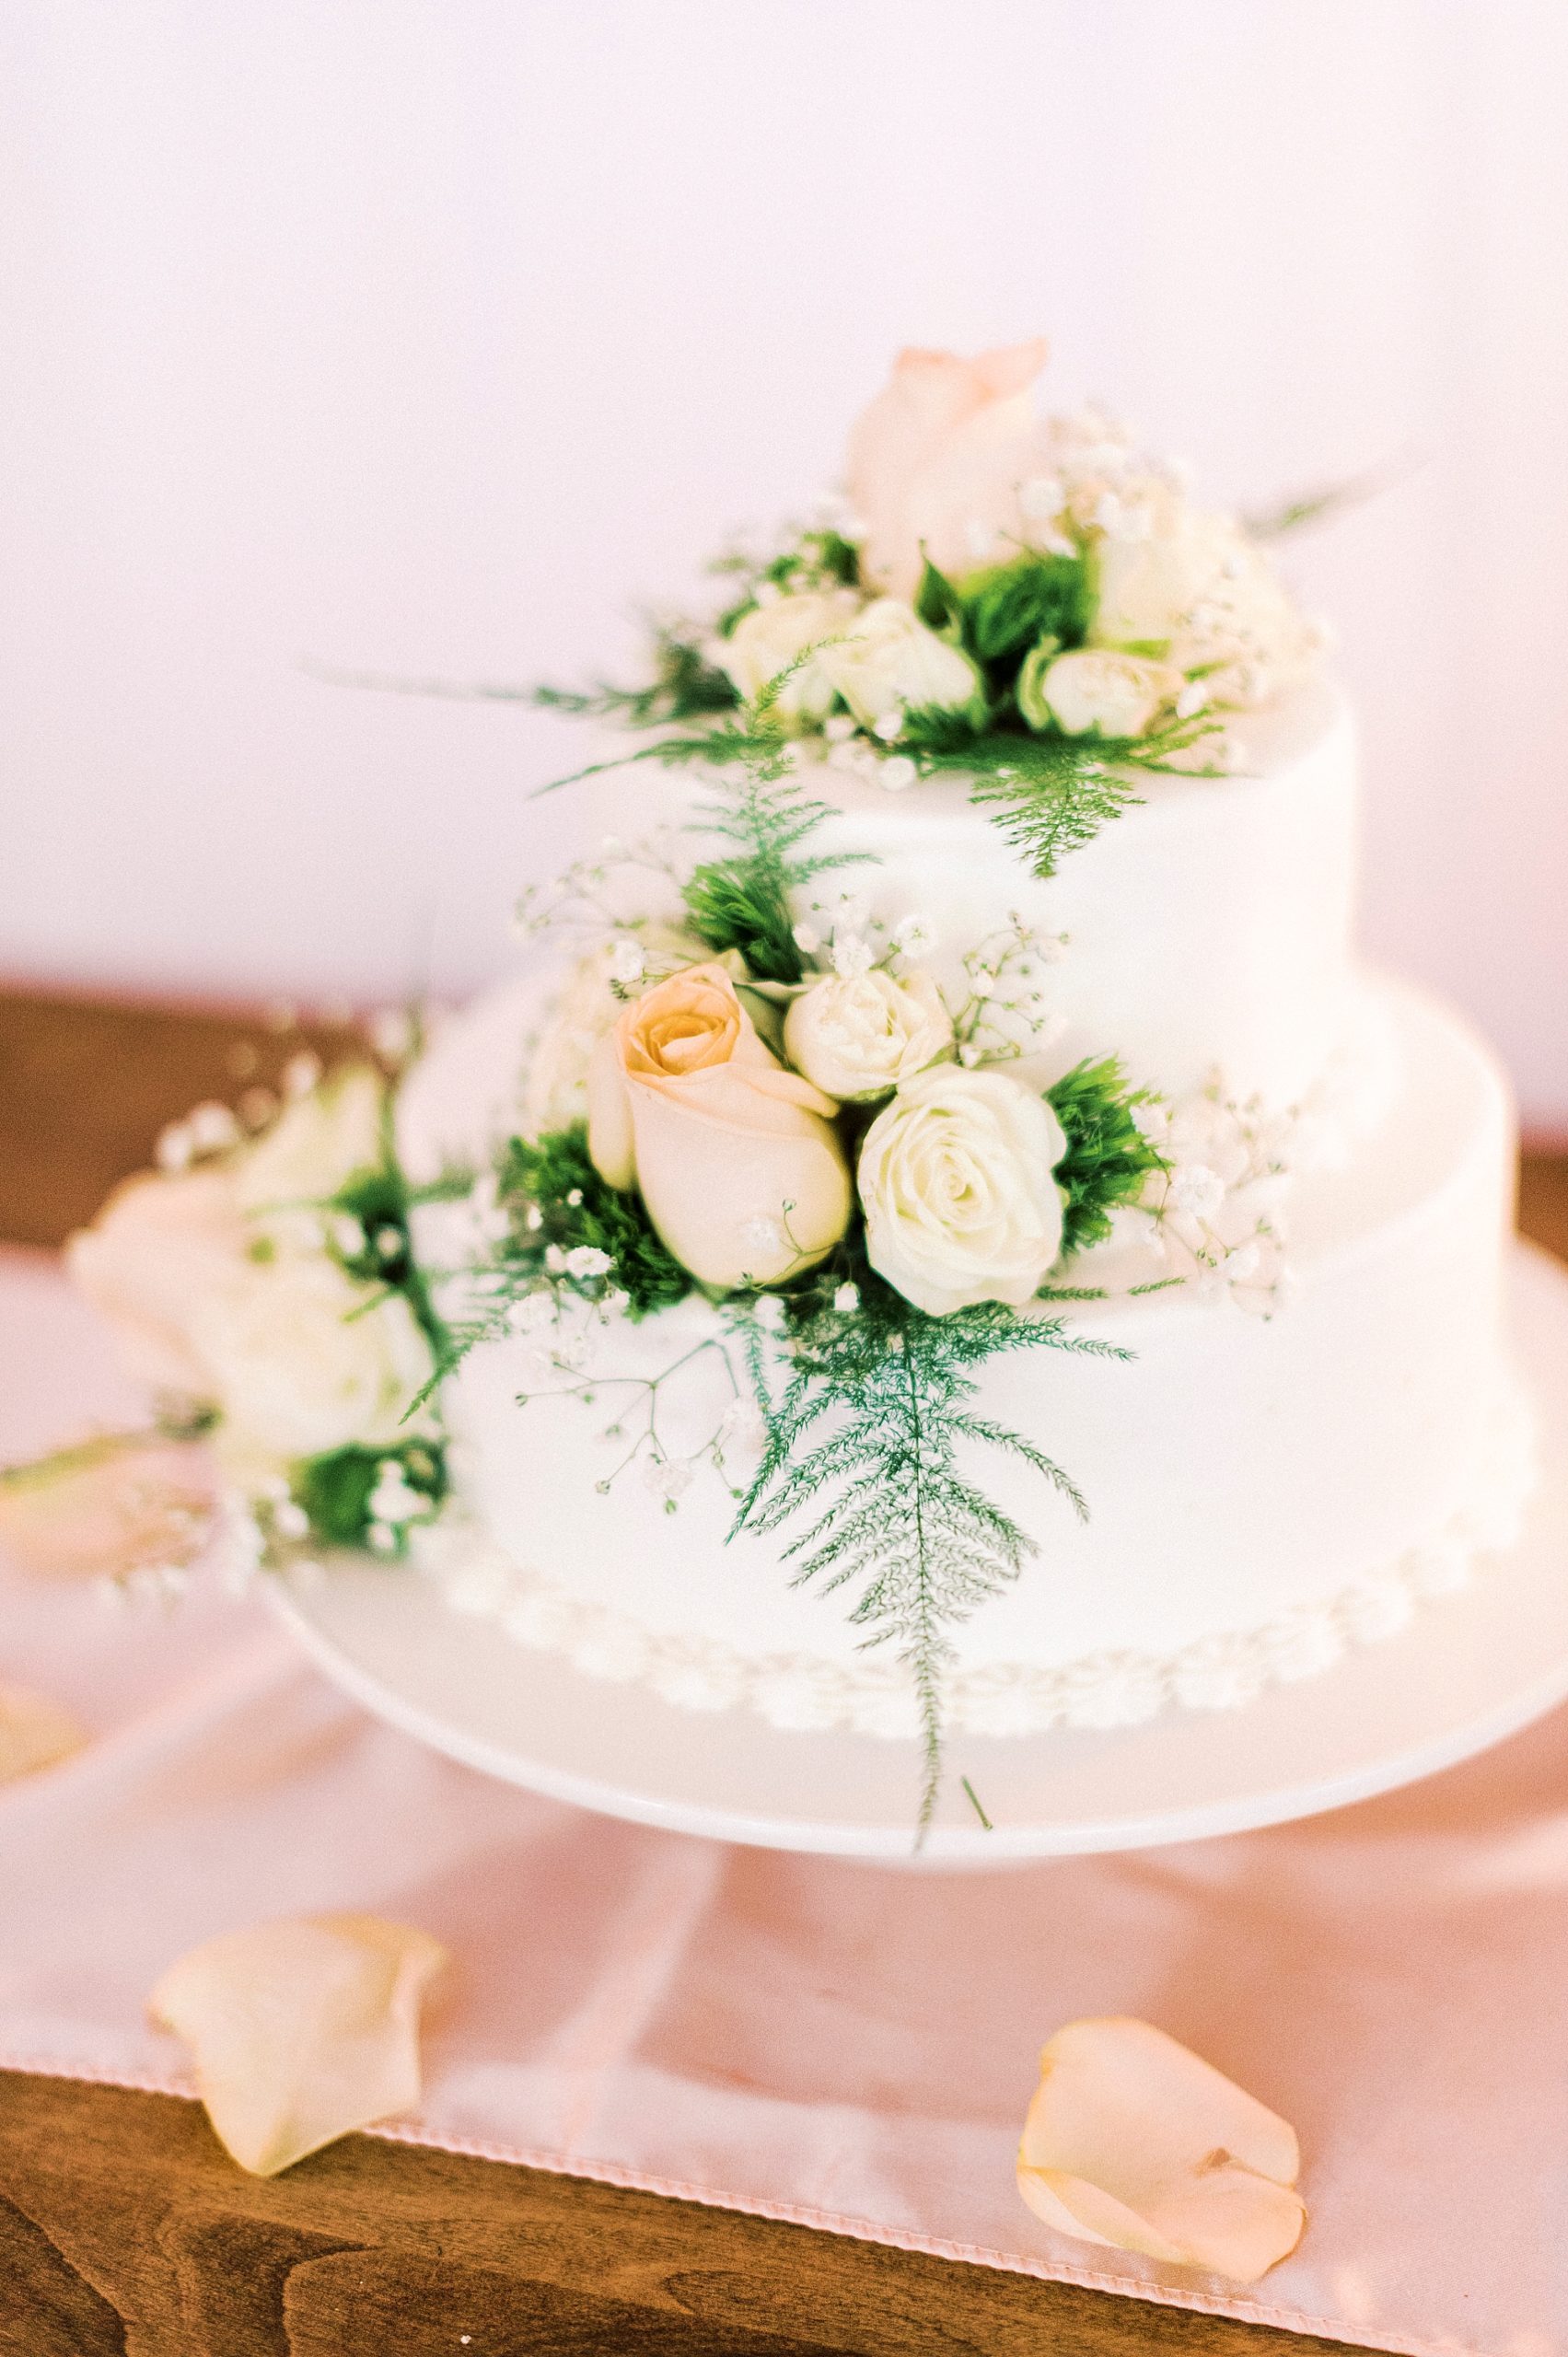 tiered wedding cake with flowers for NC wedding reception